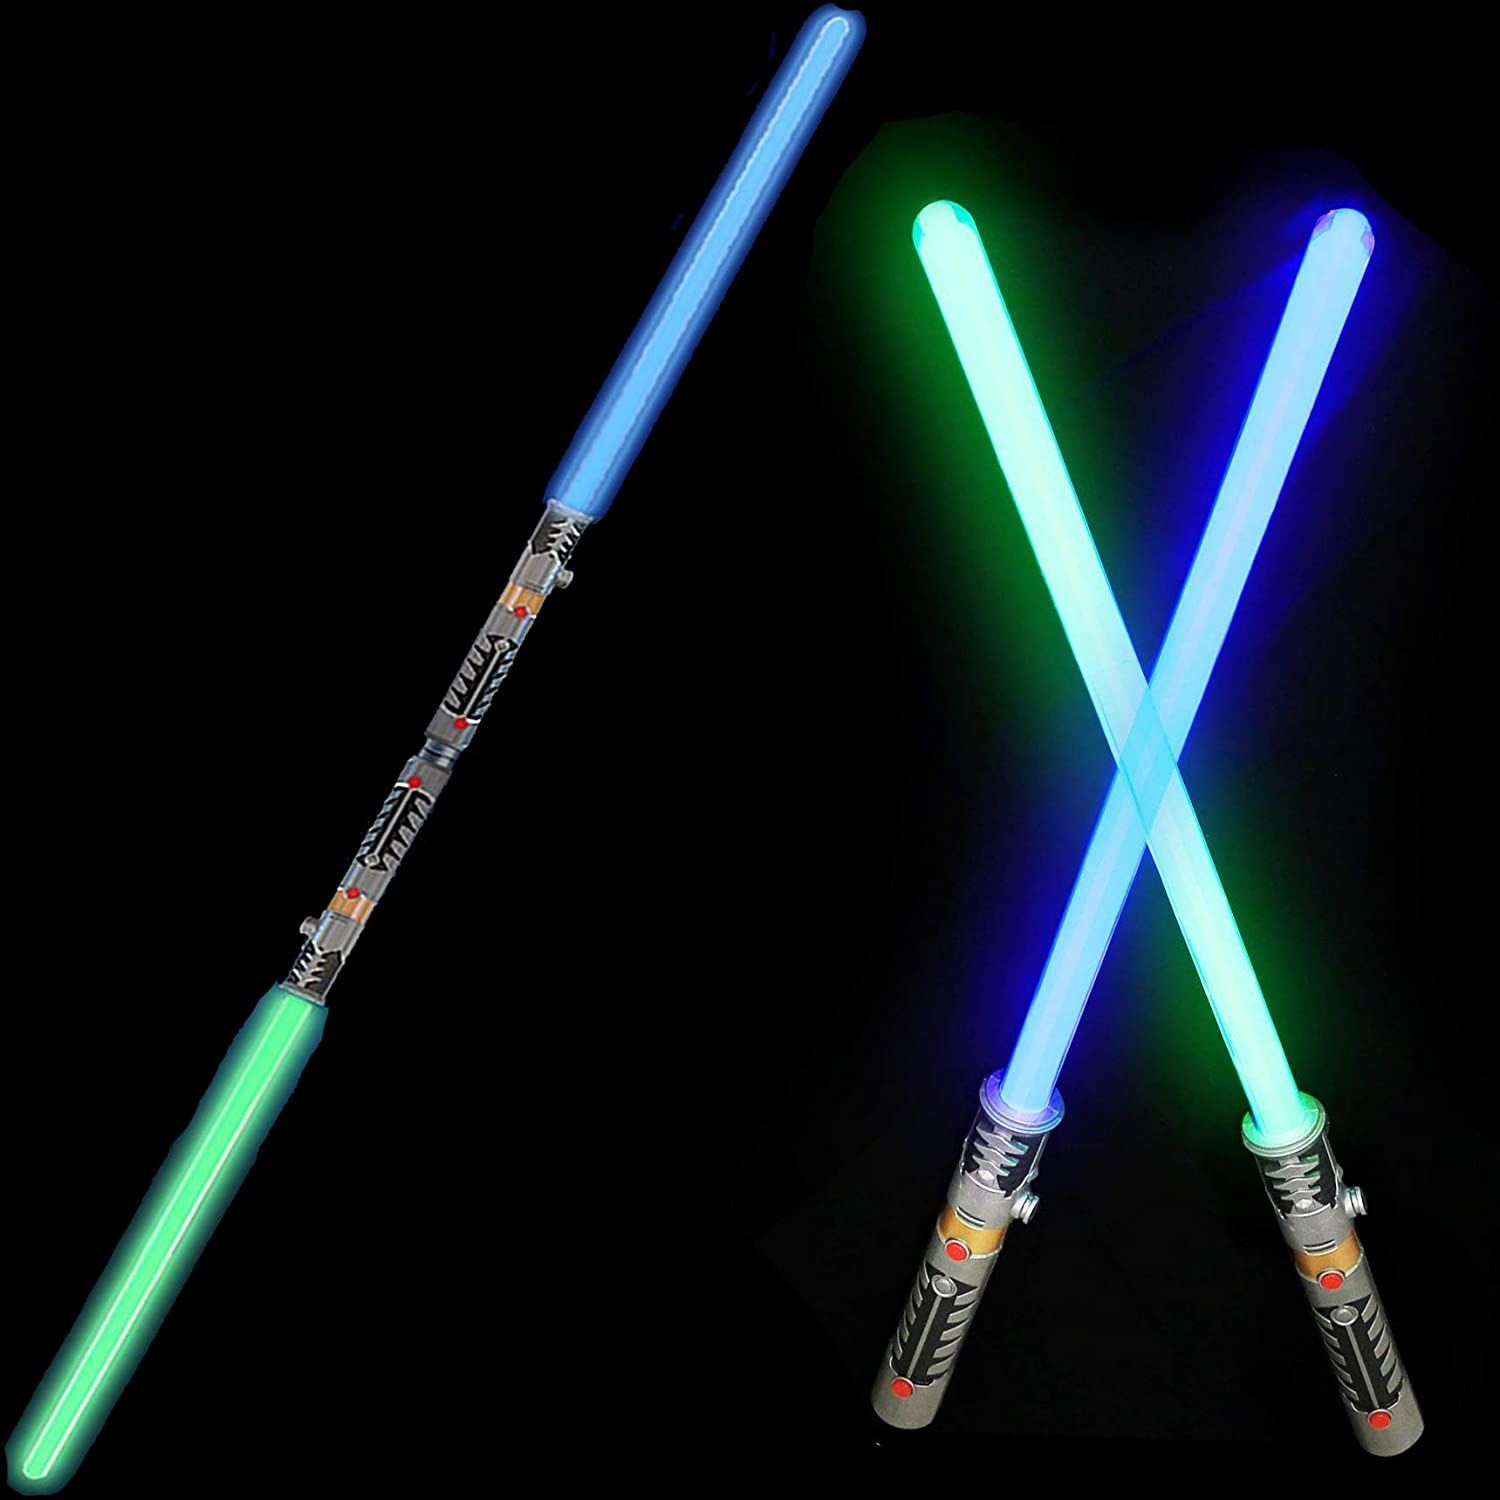 2-in-1 LED Light Up Swords Set FX Double Bladed Dual Sabers a